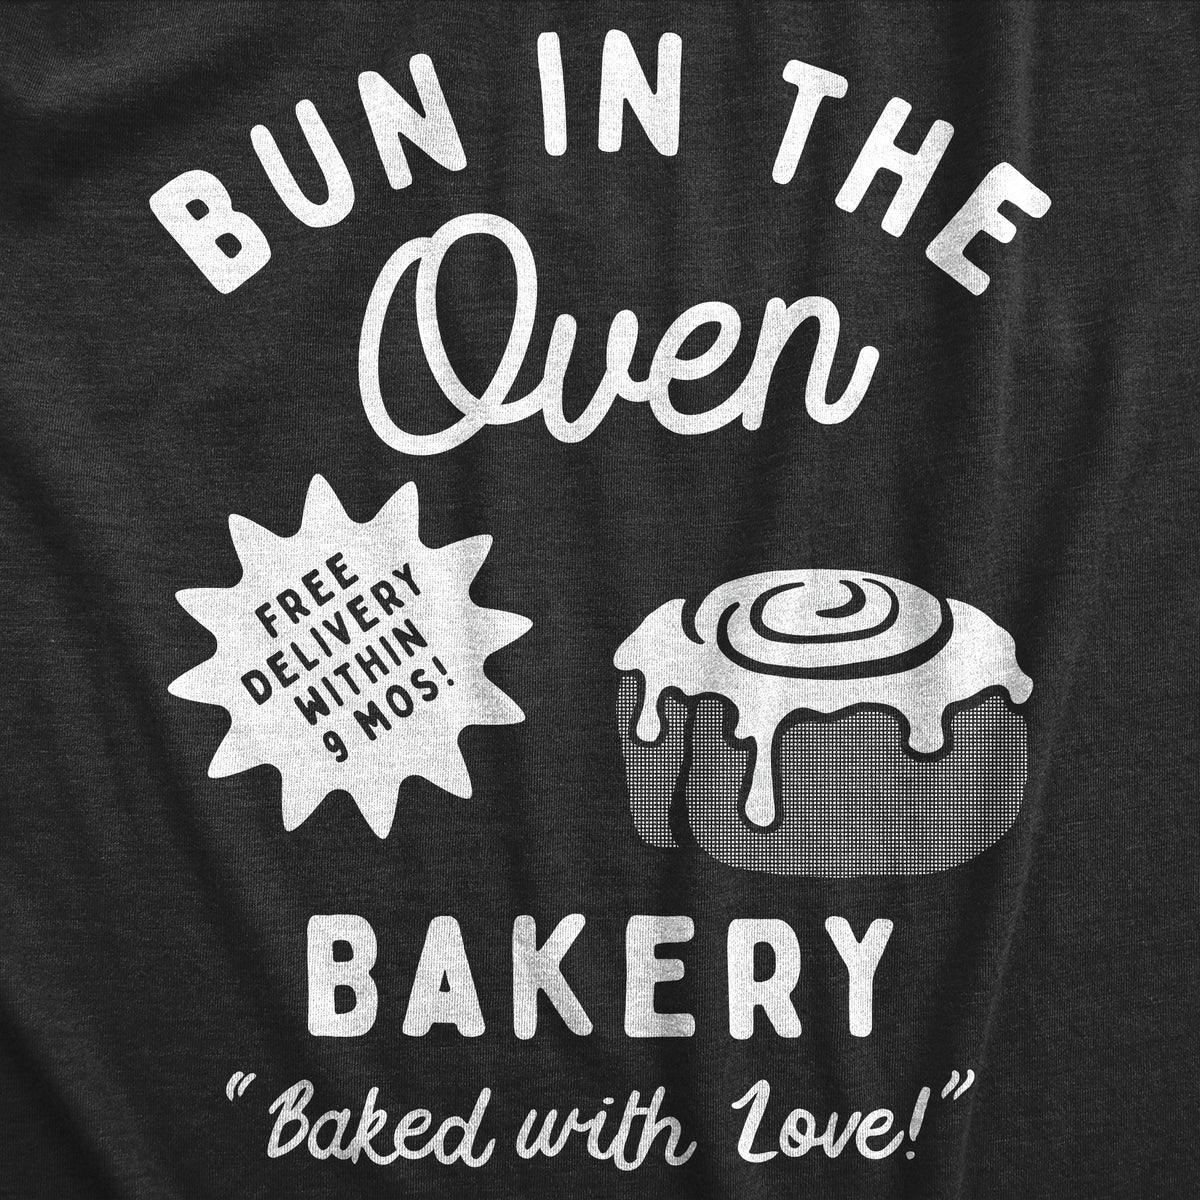 Bun In The Oven Bakery Maternity T Shirt